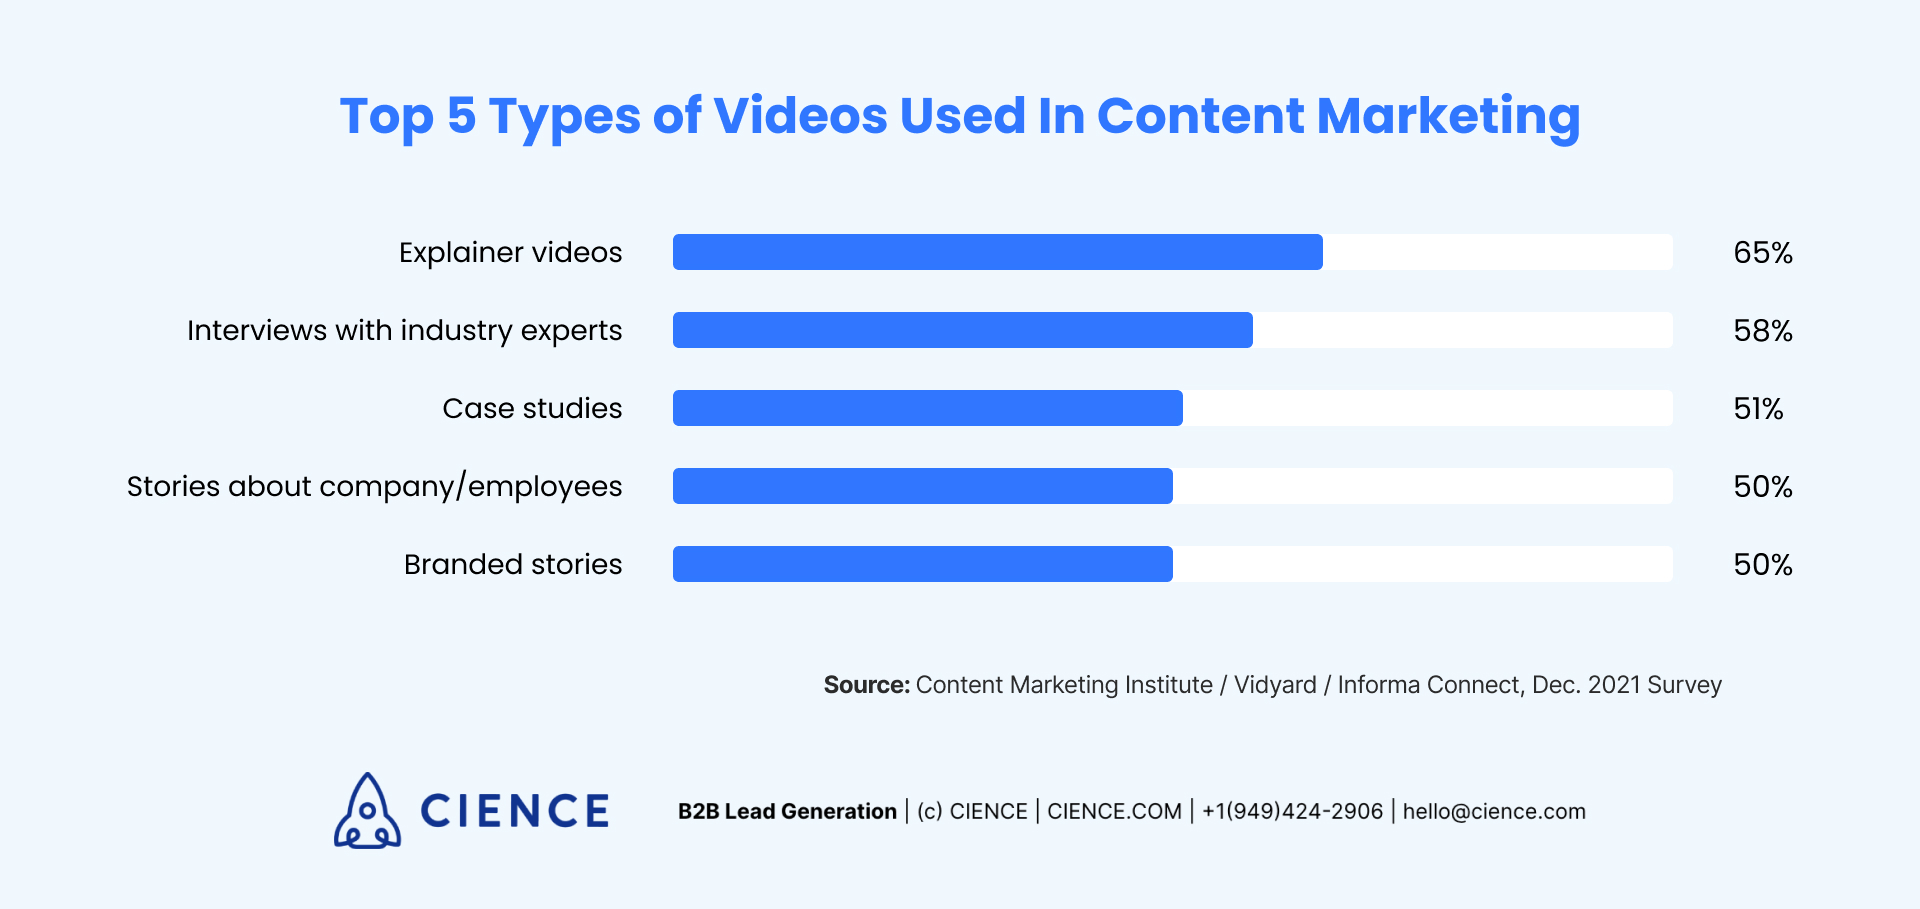 Top 5 Types of Videos Used in Content Marketing